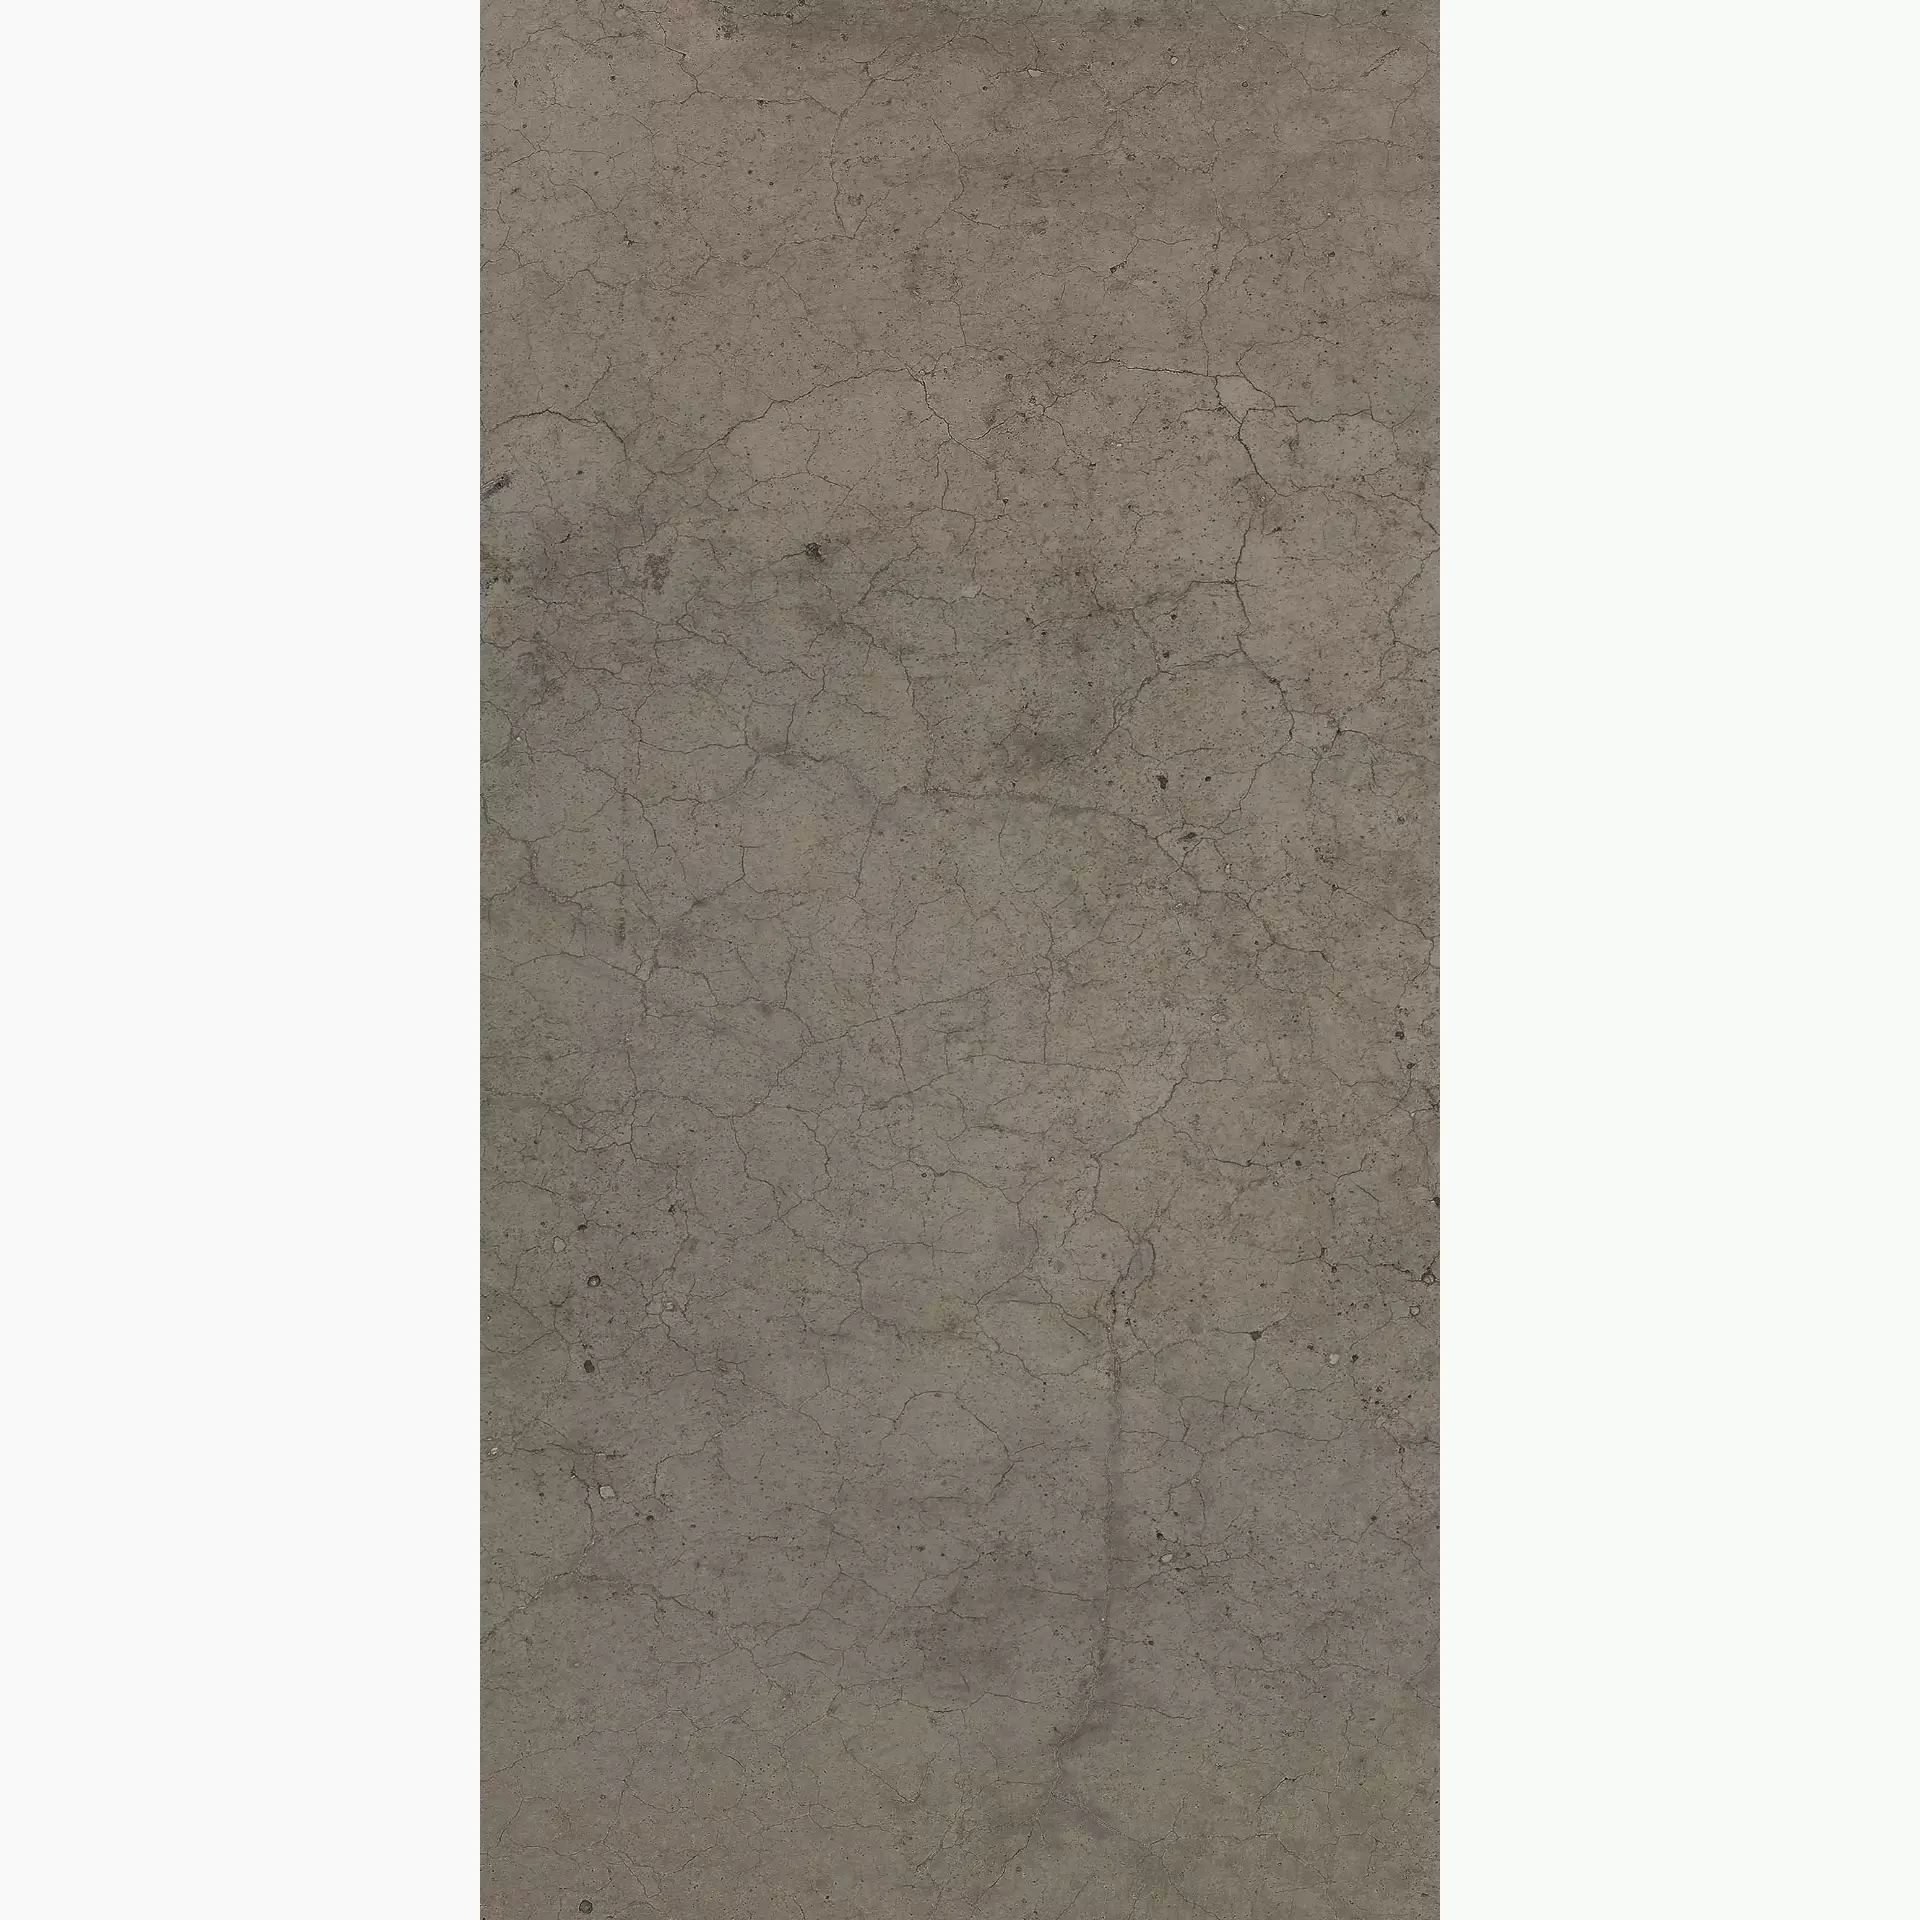 Flaviker Hyper Taupe Naturale PF60003170 30x60cm rectified 8,5mm